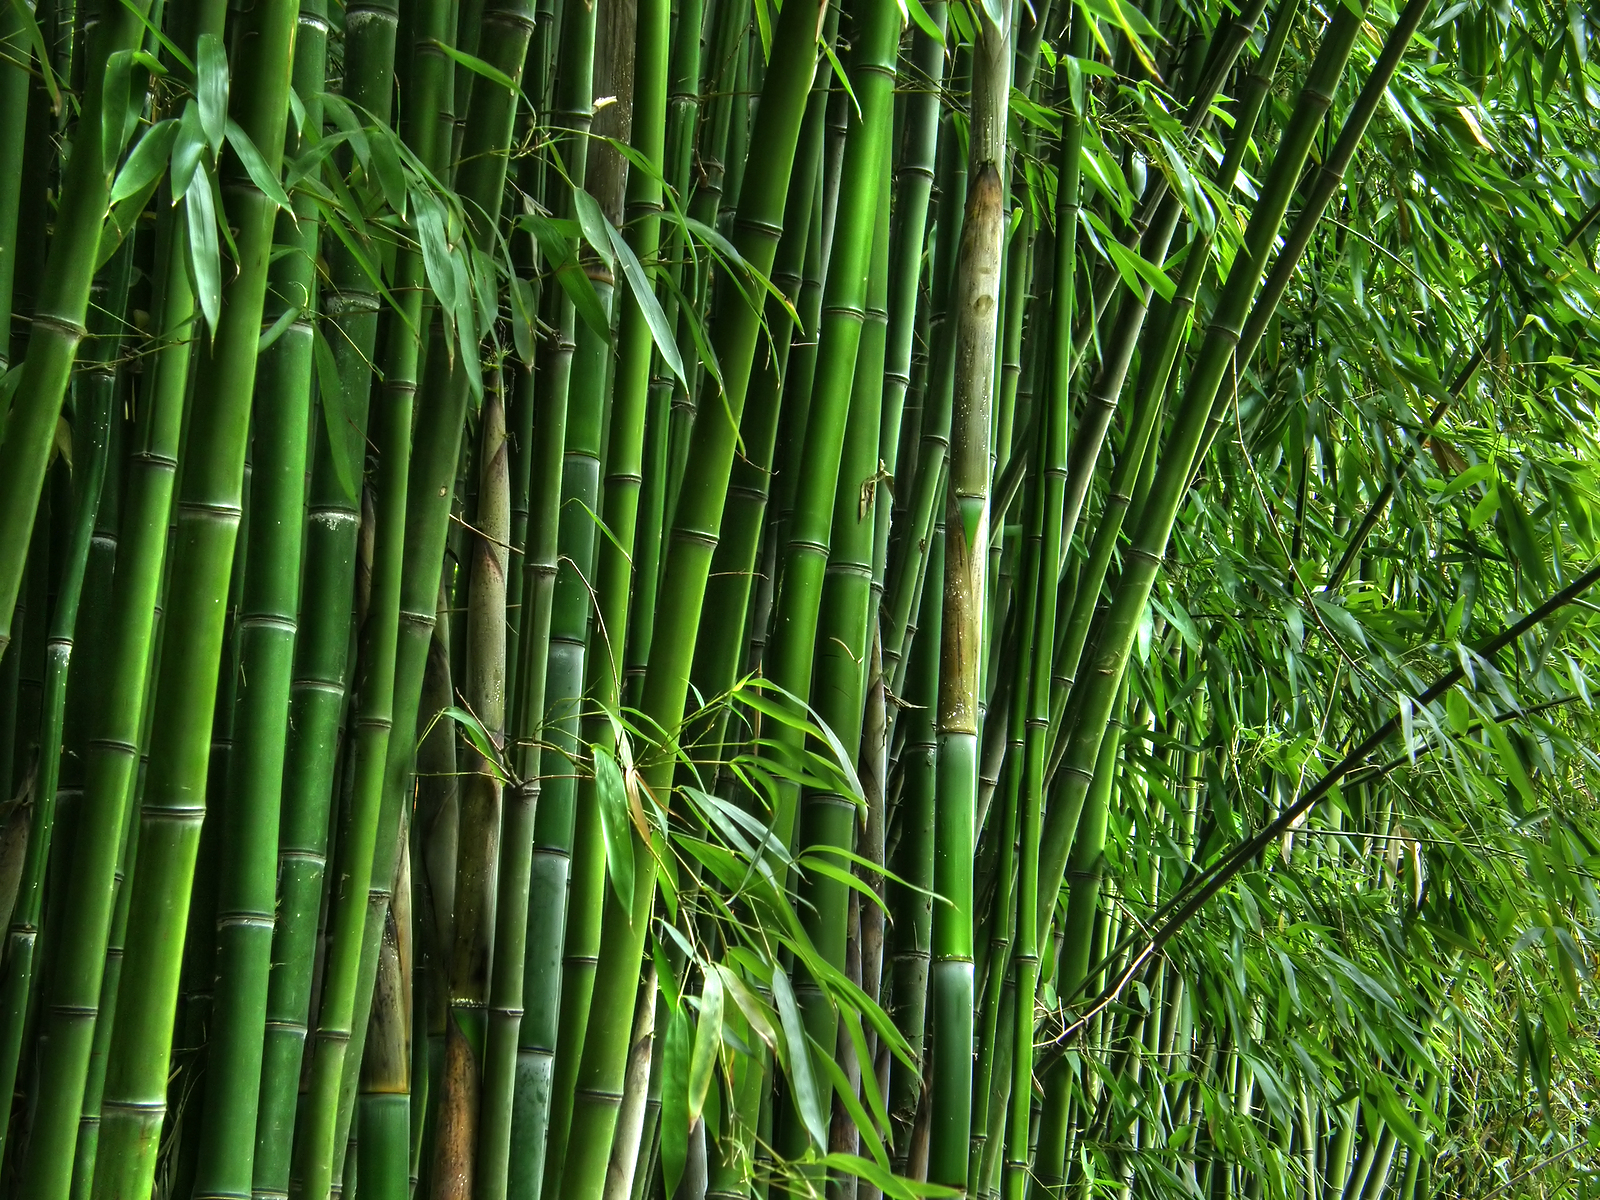 The economic value of bamboo